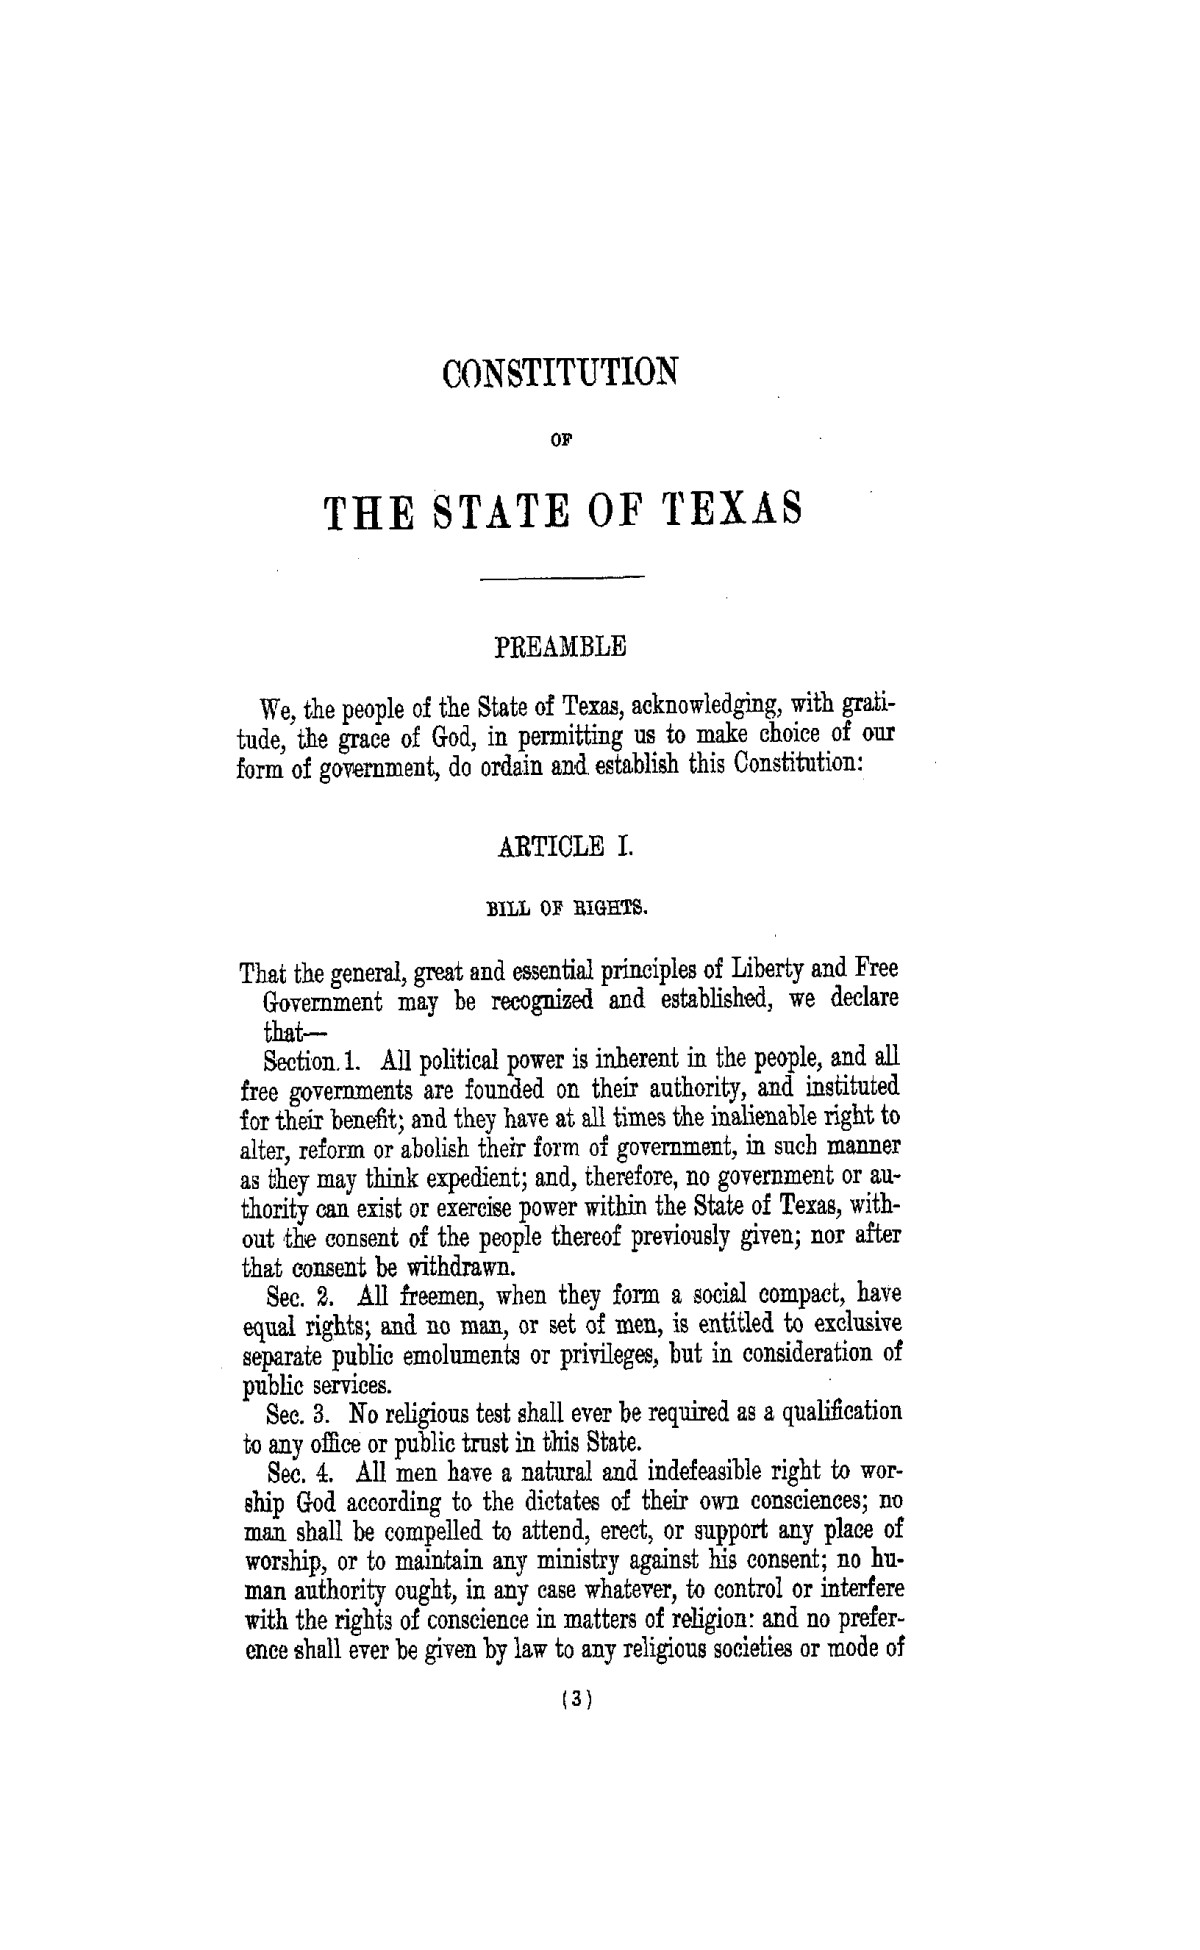 The Laws of Texas, 1822-1897 Volume 5
                                                
                                                    3
                                                